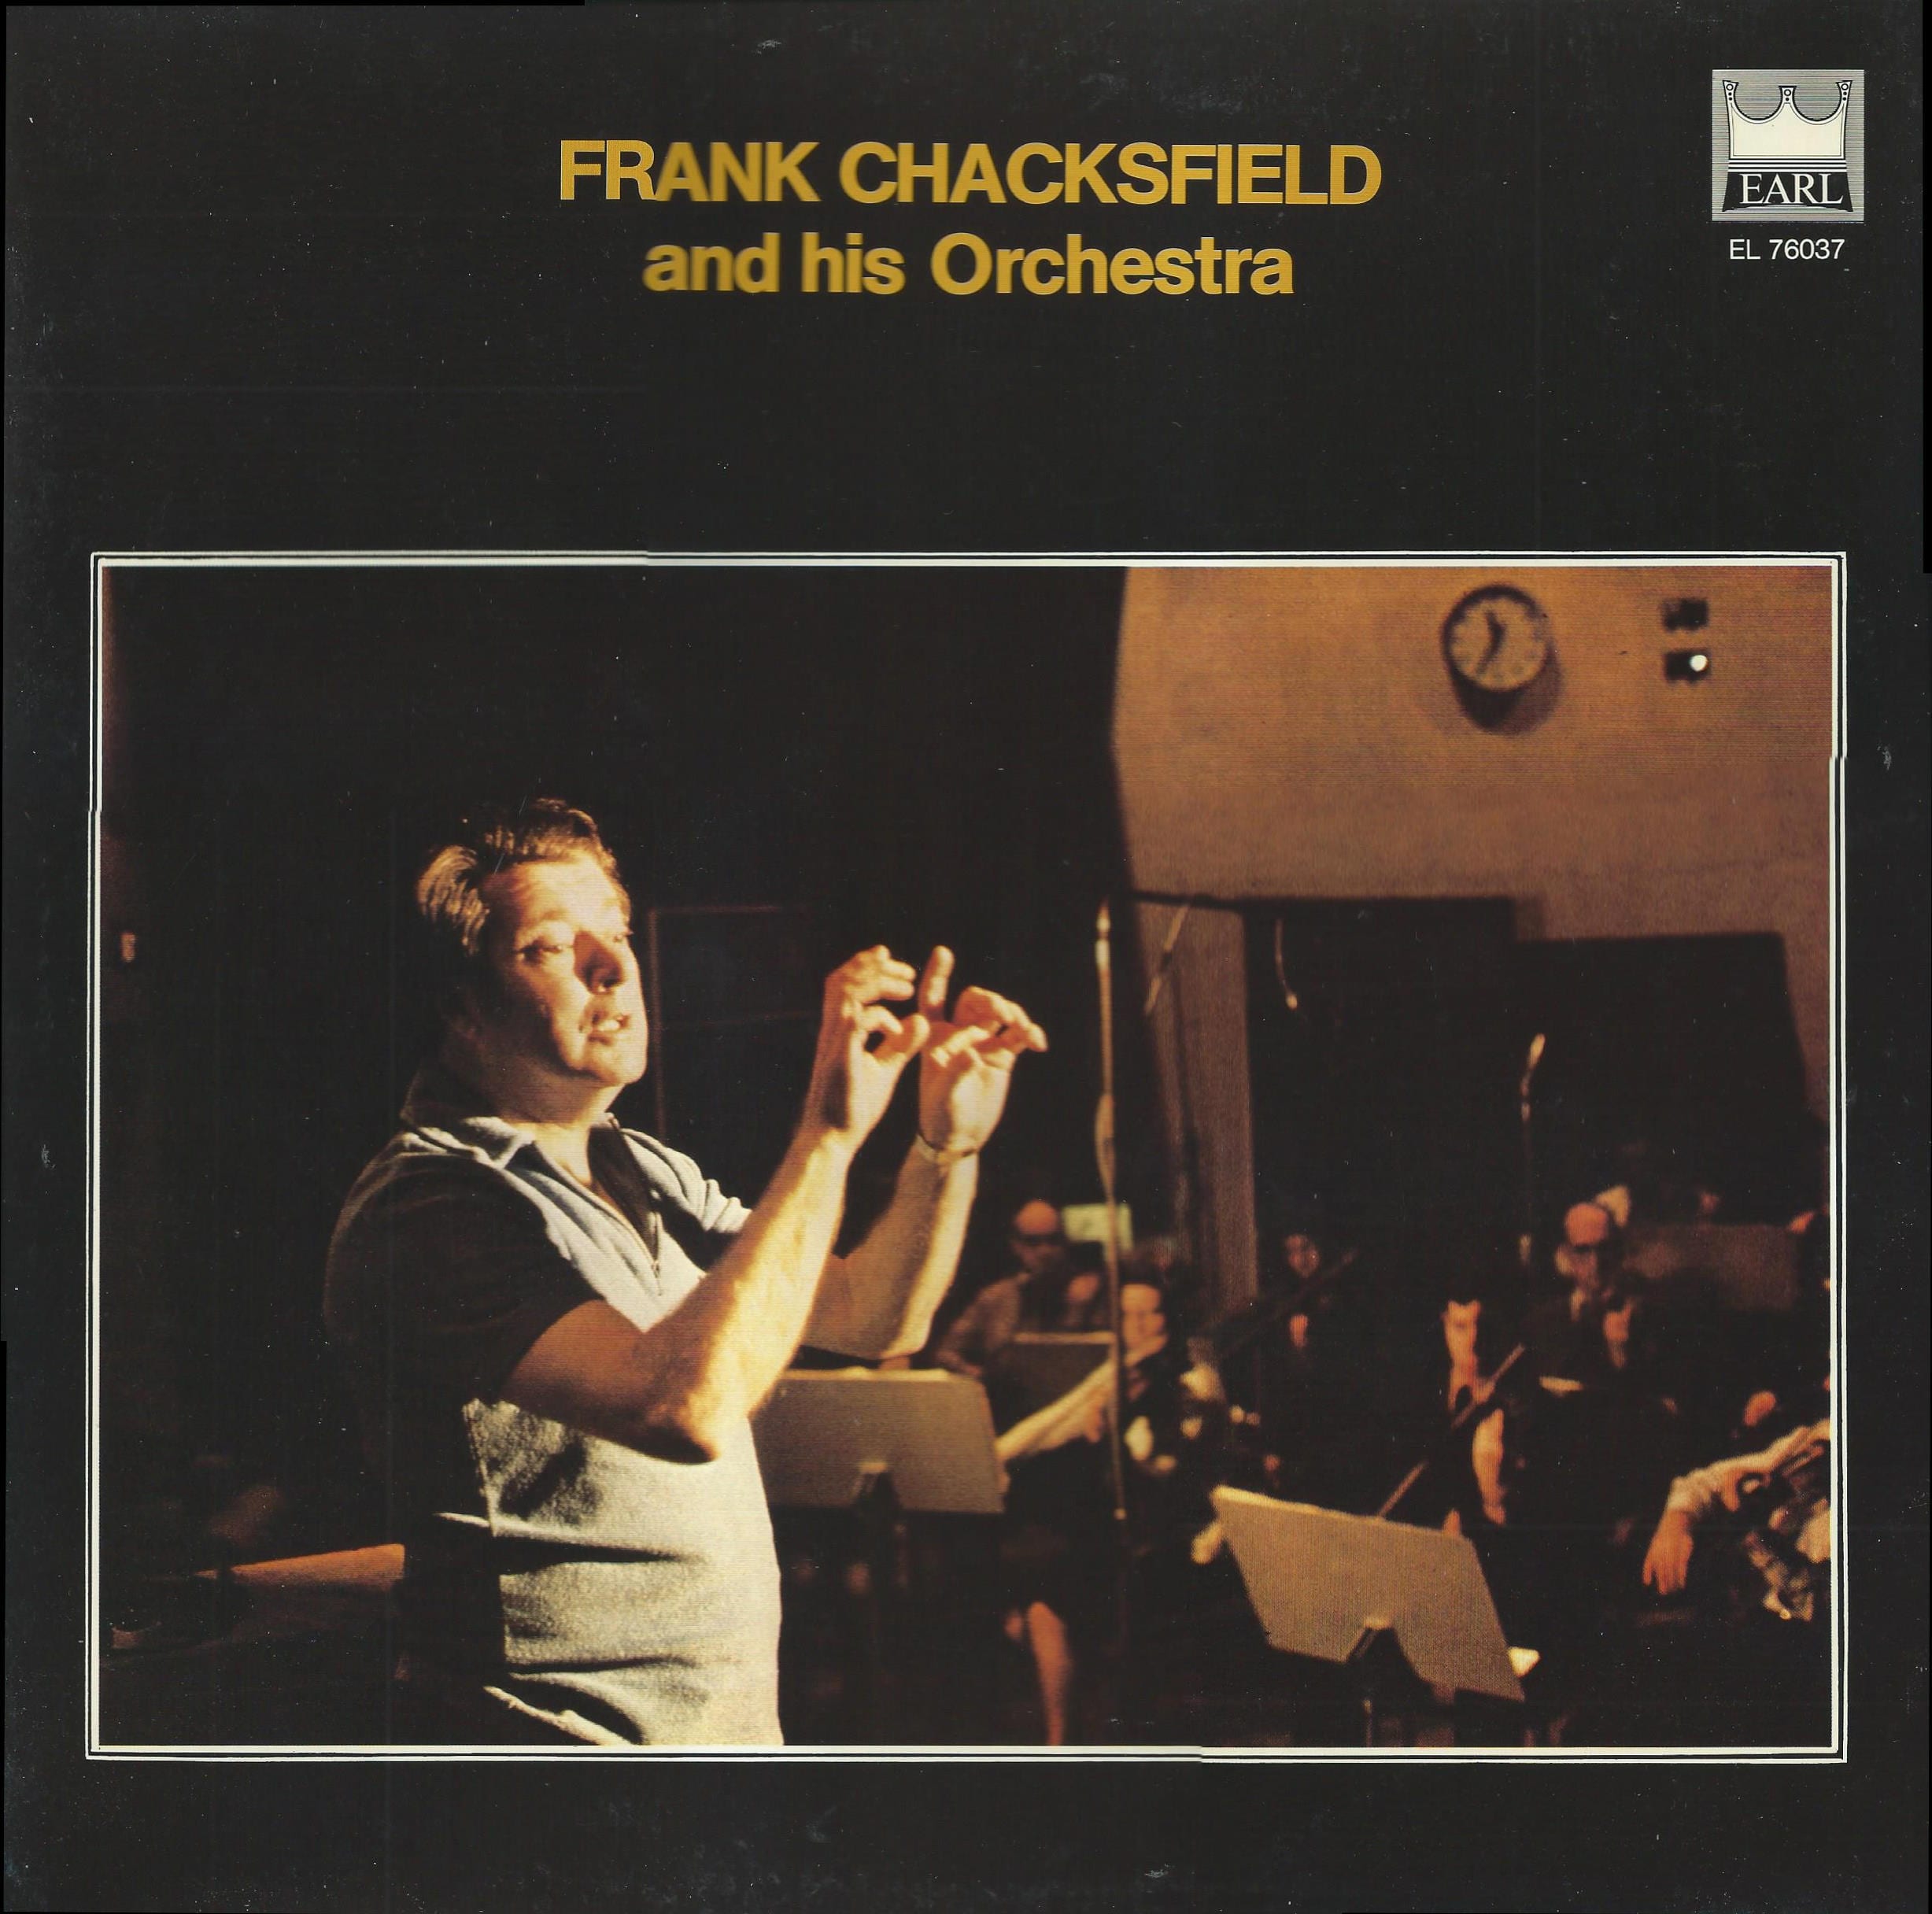 Frank Chacksfield and his Orchestra – 1